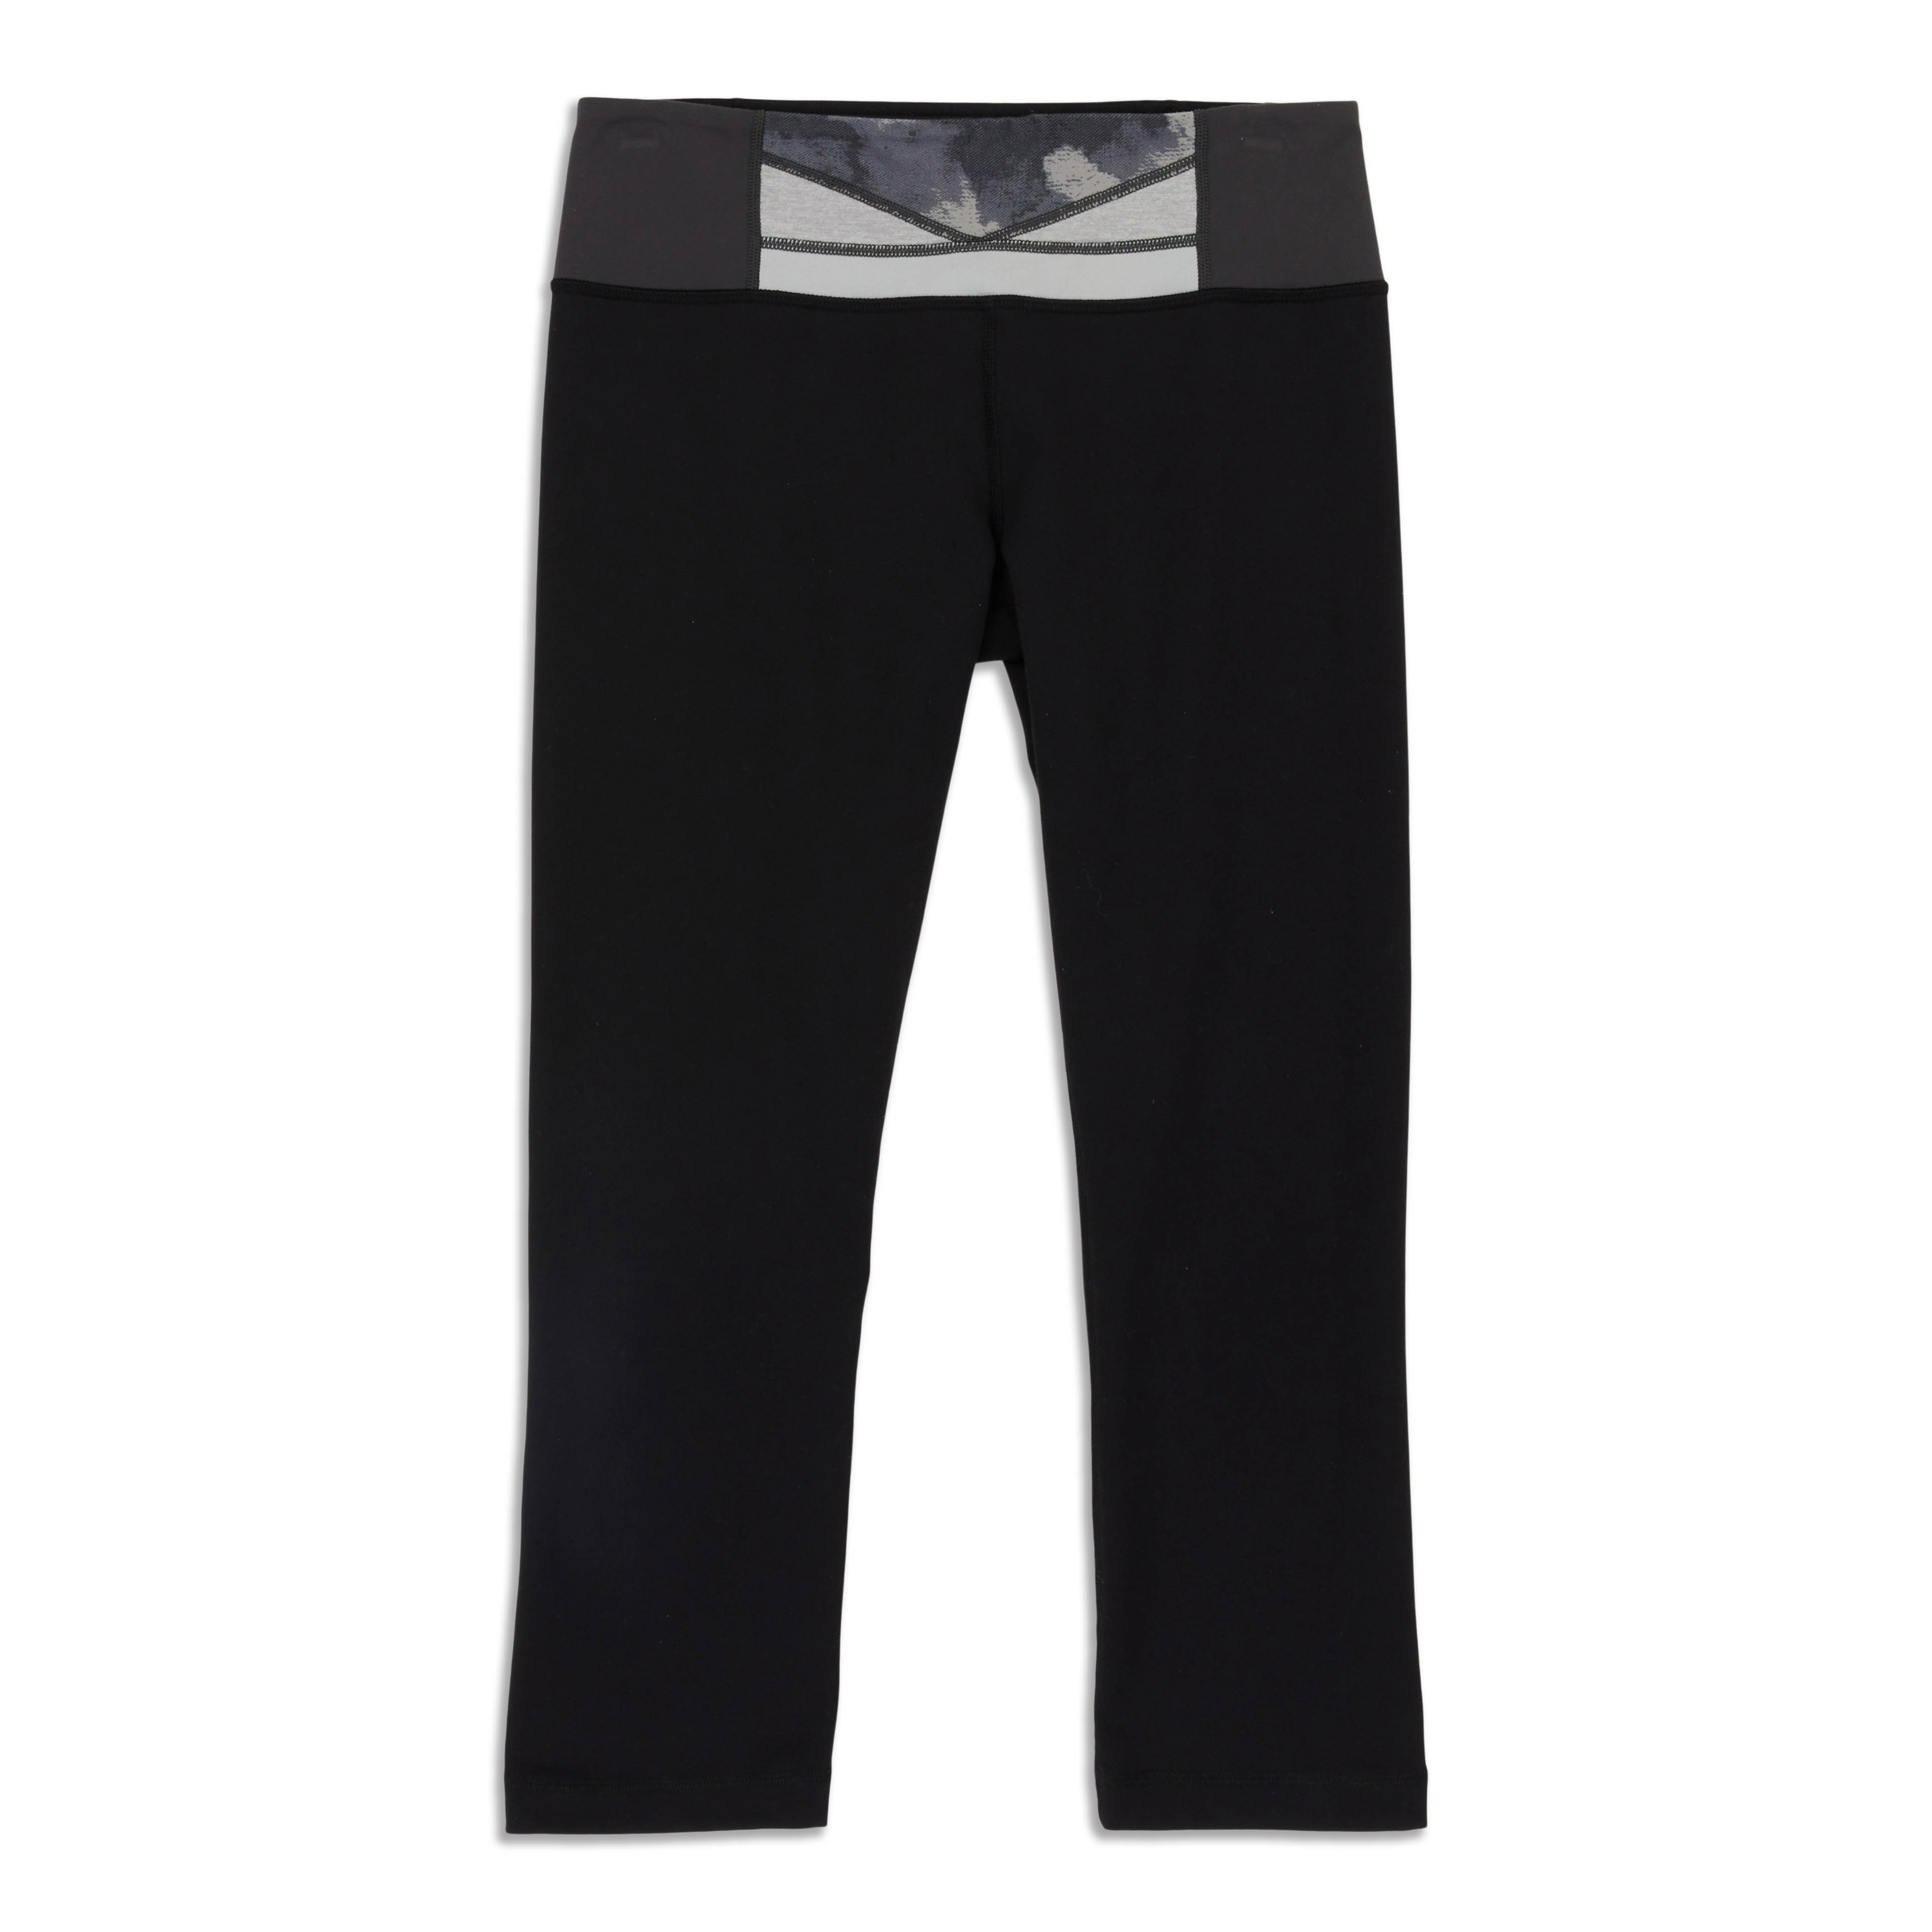 Lululemon Joggers, Size 12 in Black, Barely Worn, Price